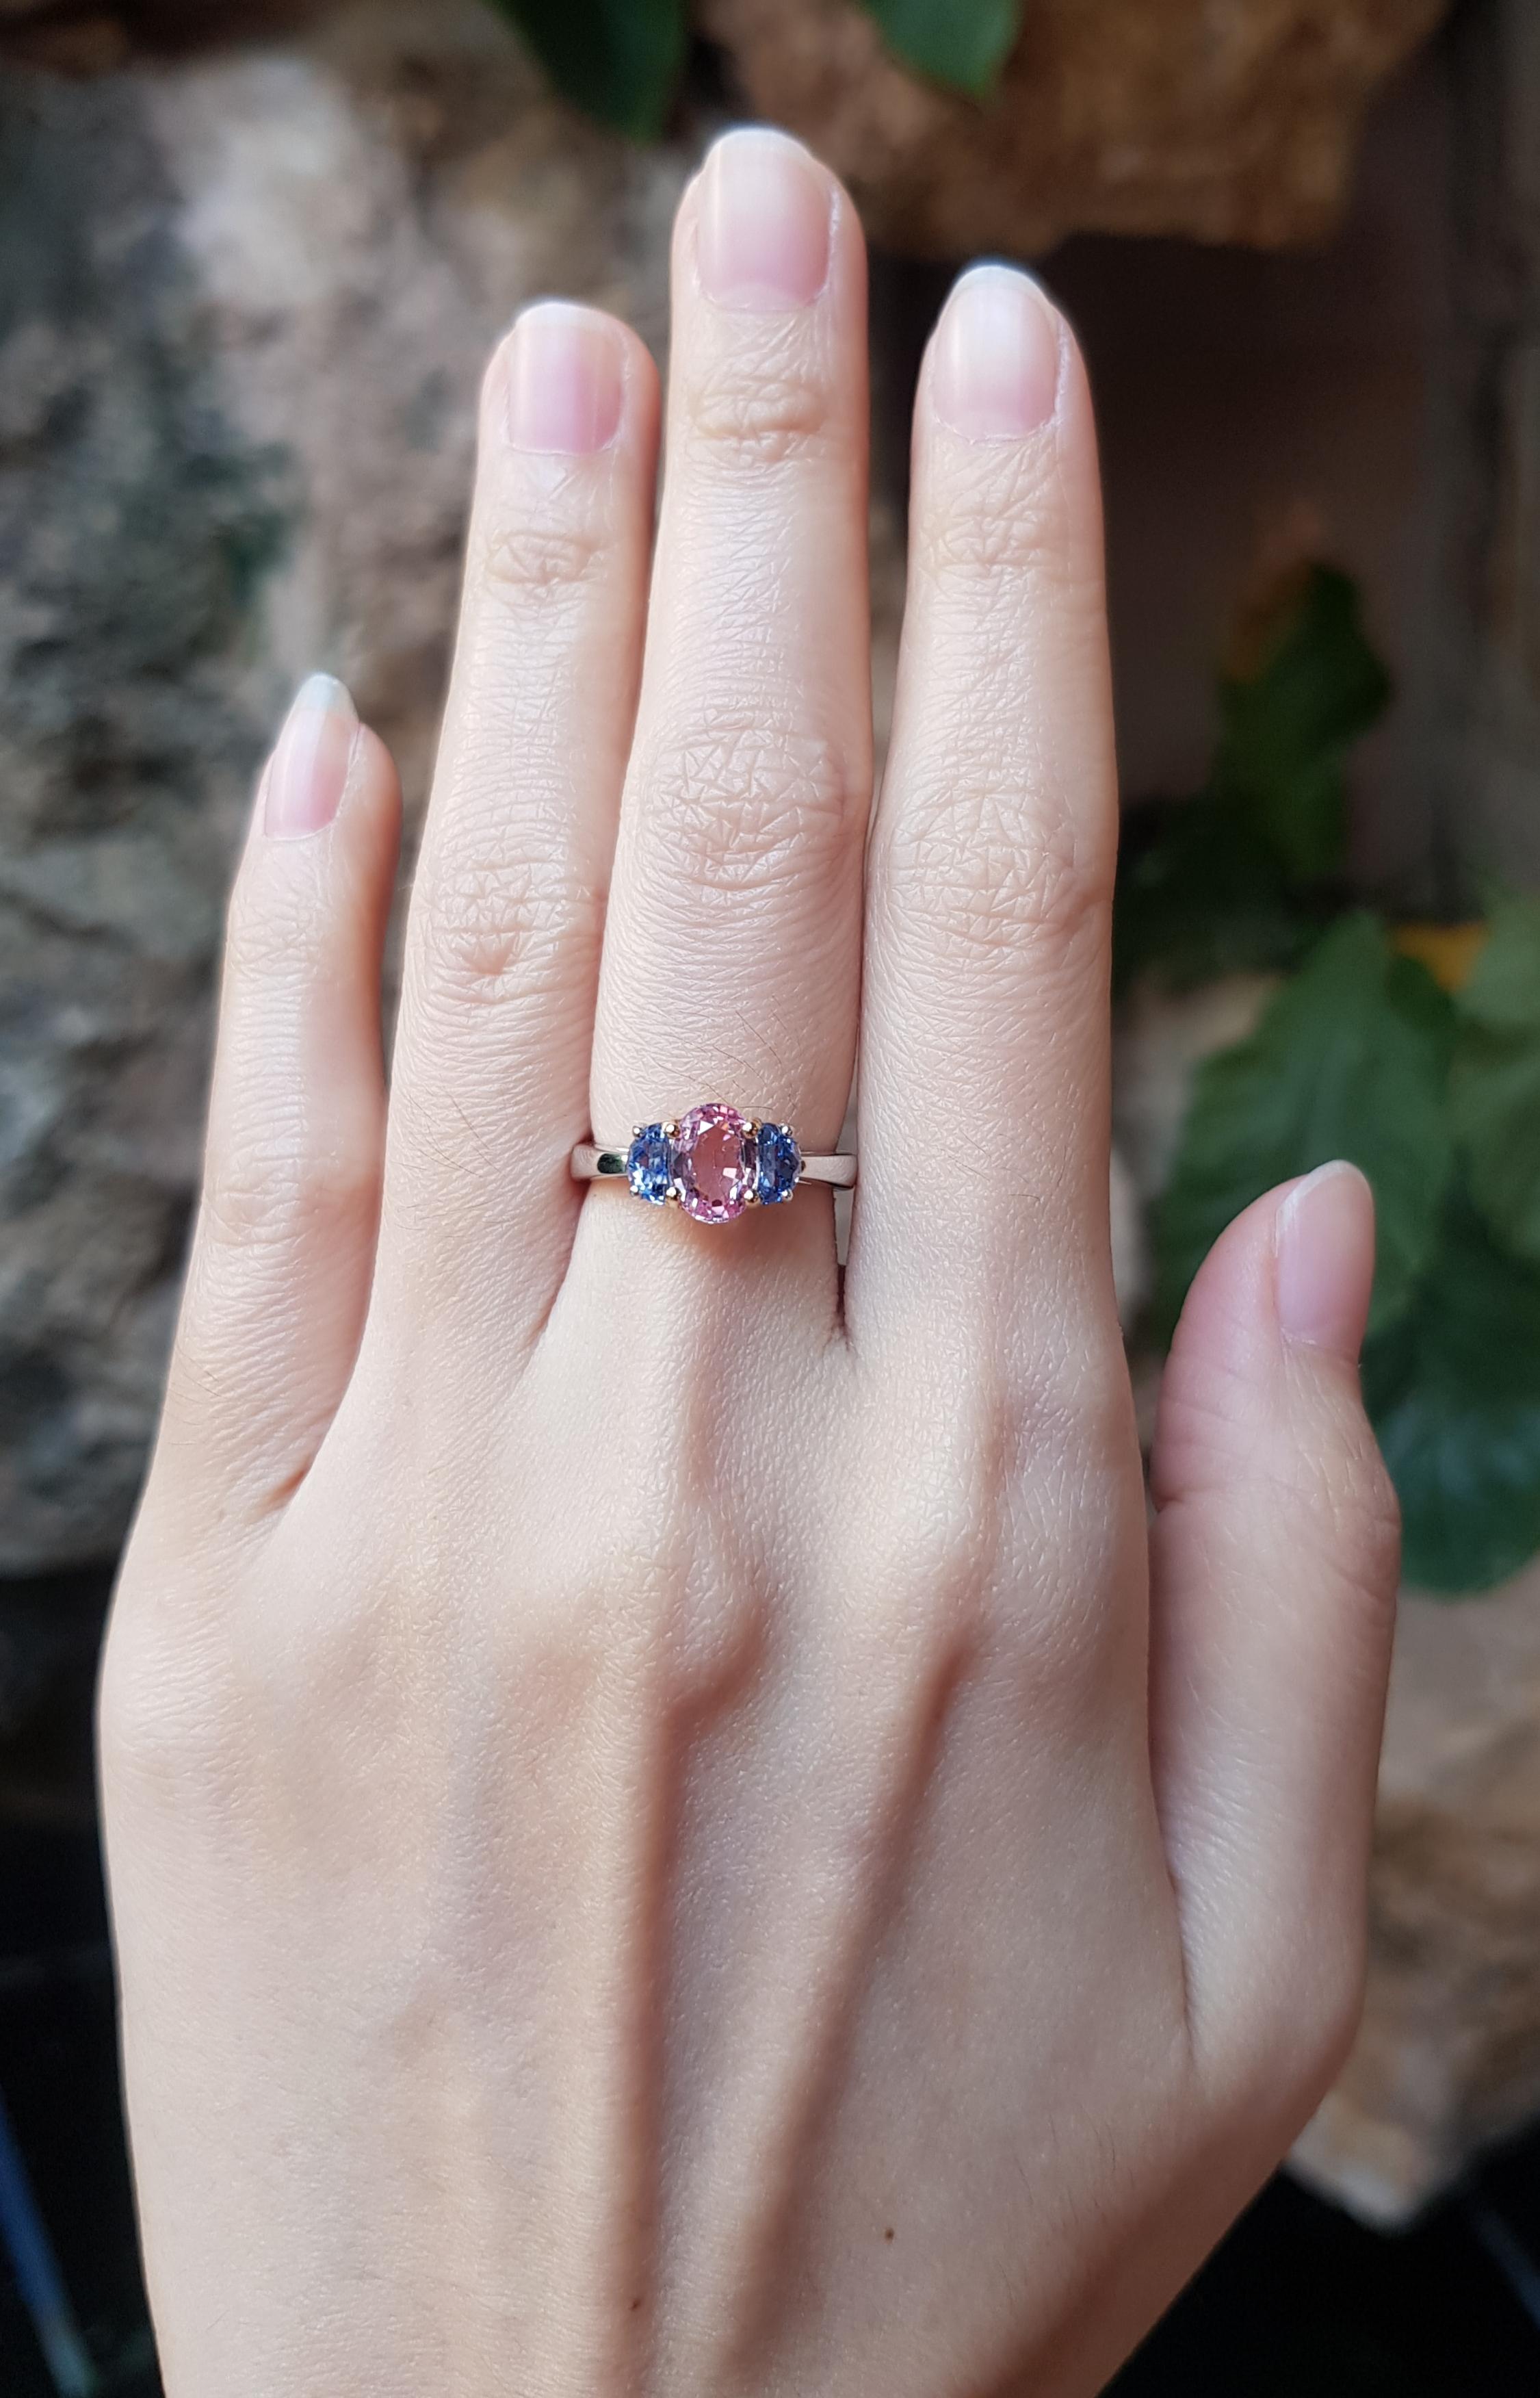 Pink Sapphire 1.26 carats with Blue Sapphire 0.76 carats Ring set in 18 Karat Rose Gold and Platinum 950 Settings

Width:  1.0 cm 
Length: 0.7 cm
Ring Size: 50
Total Weight: 5.27  grams



